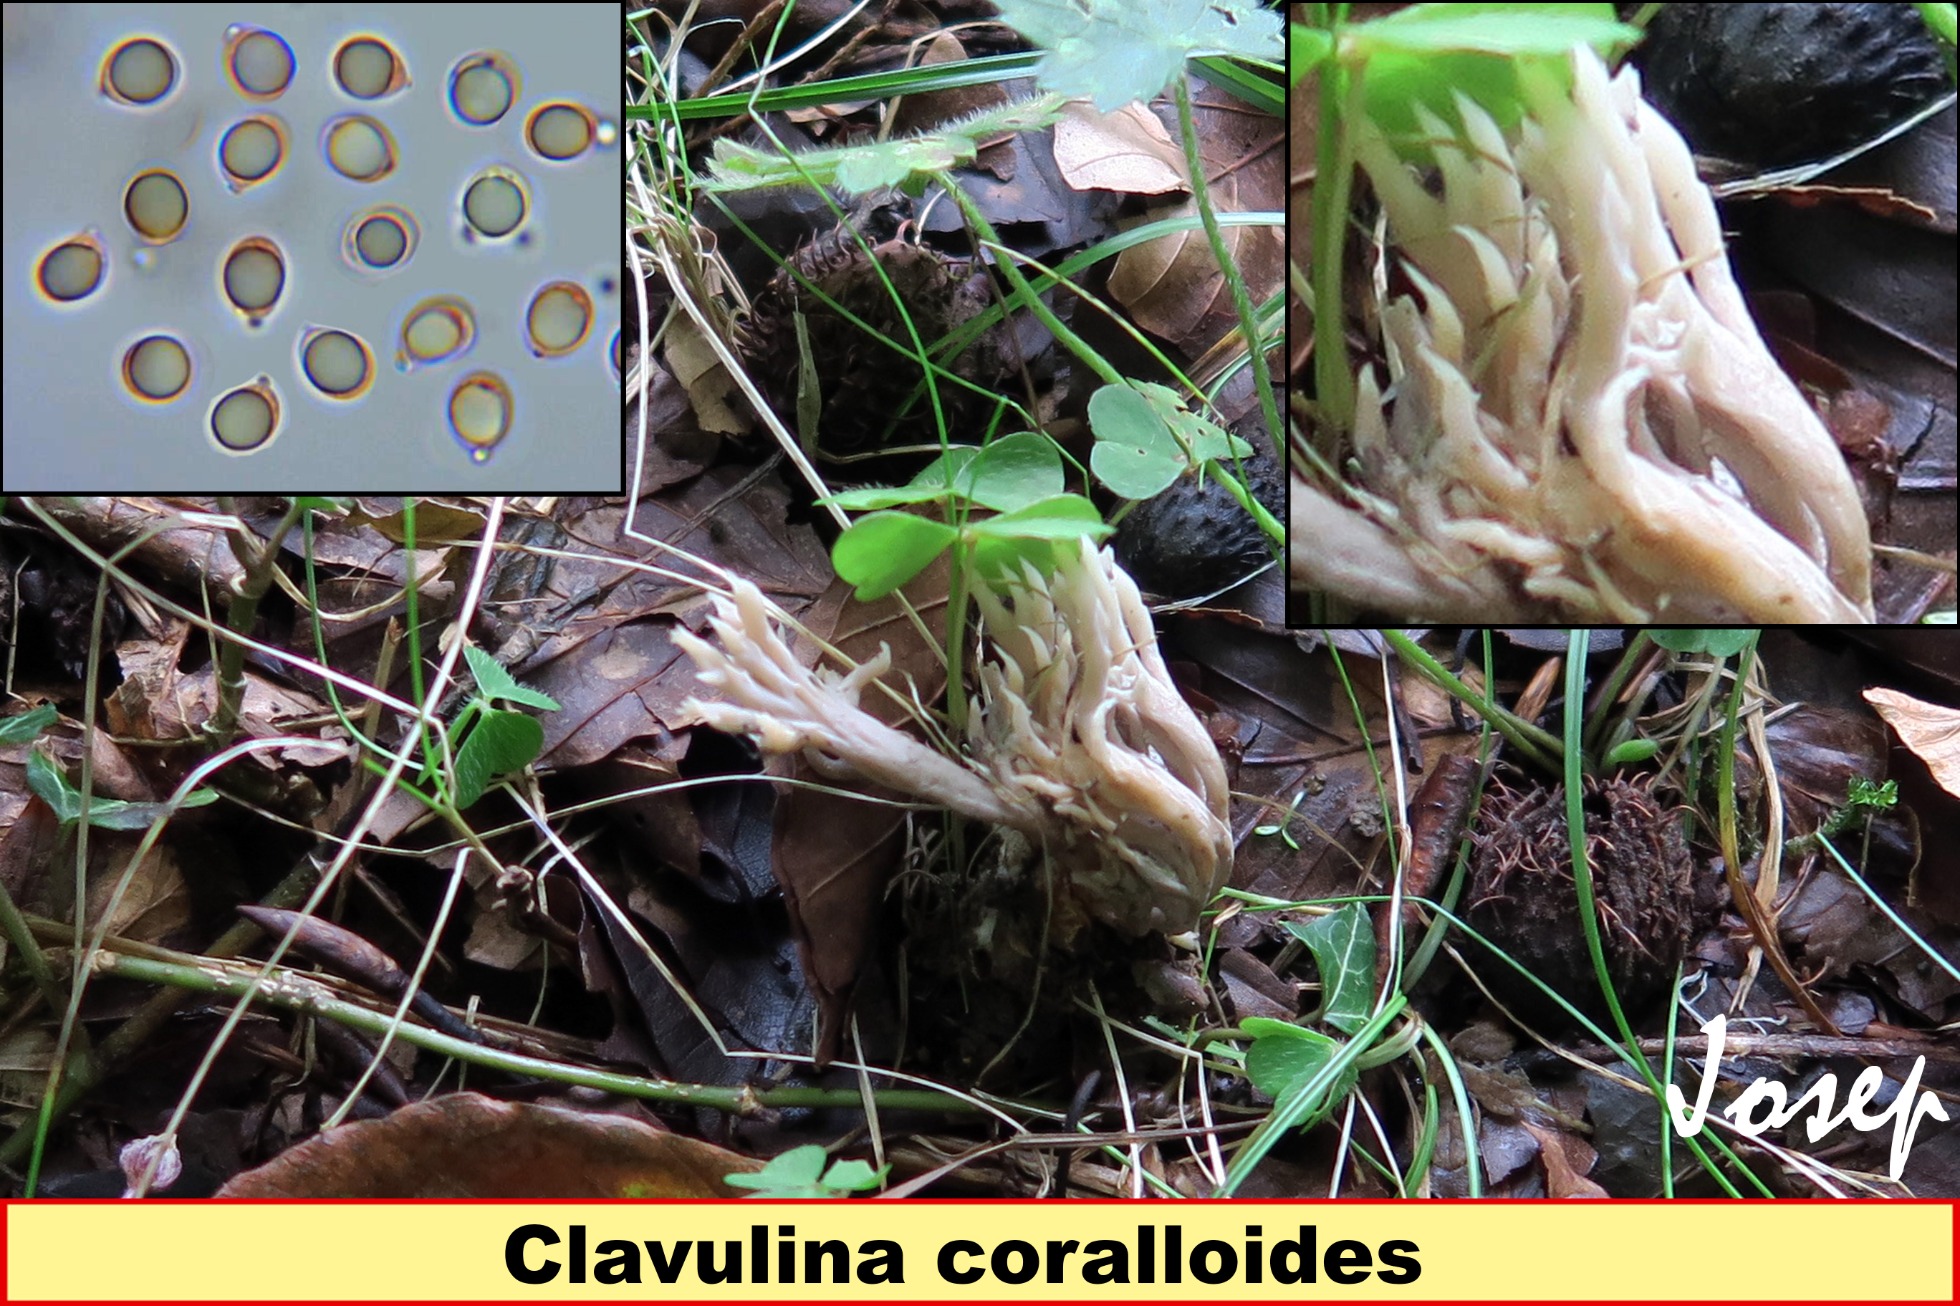 Clavulinacoralloides_2021-11-27.jpg